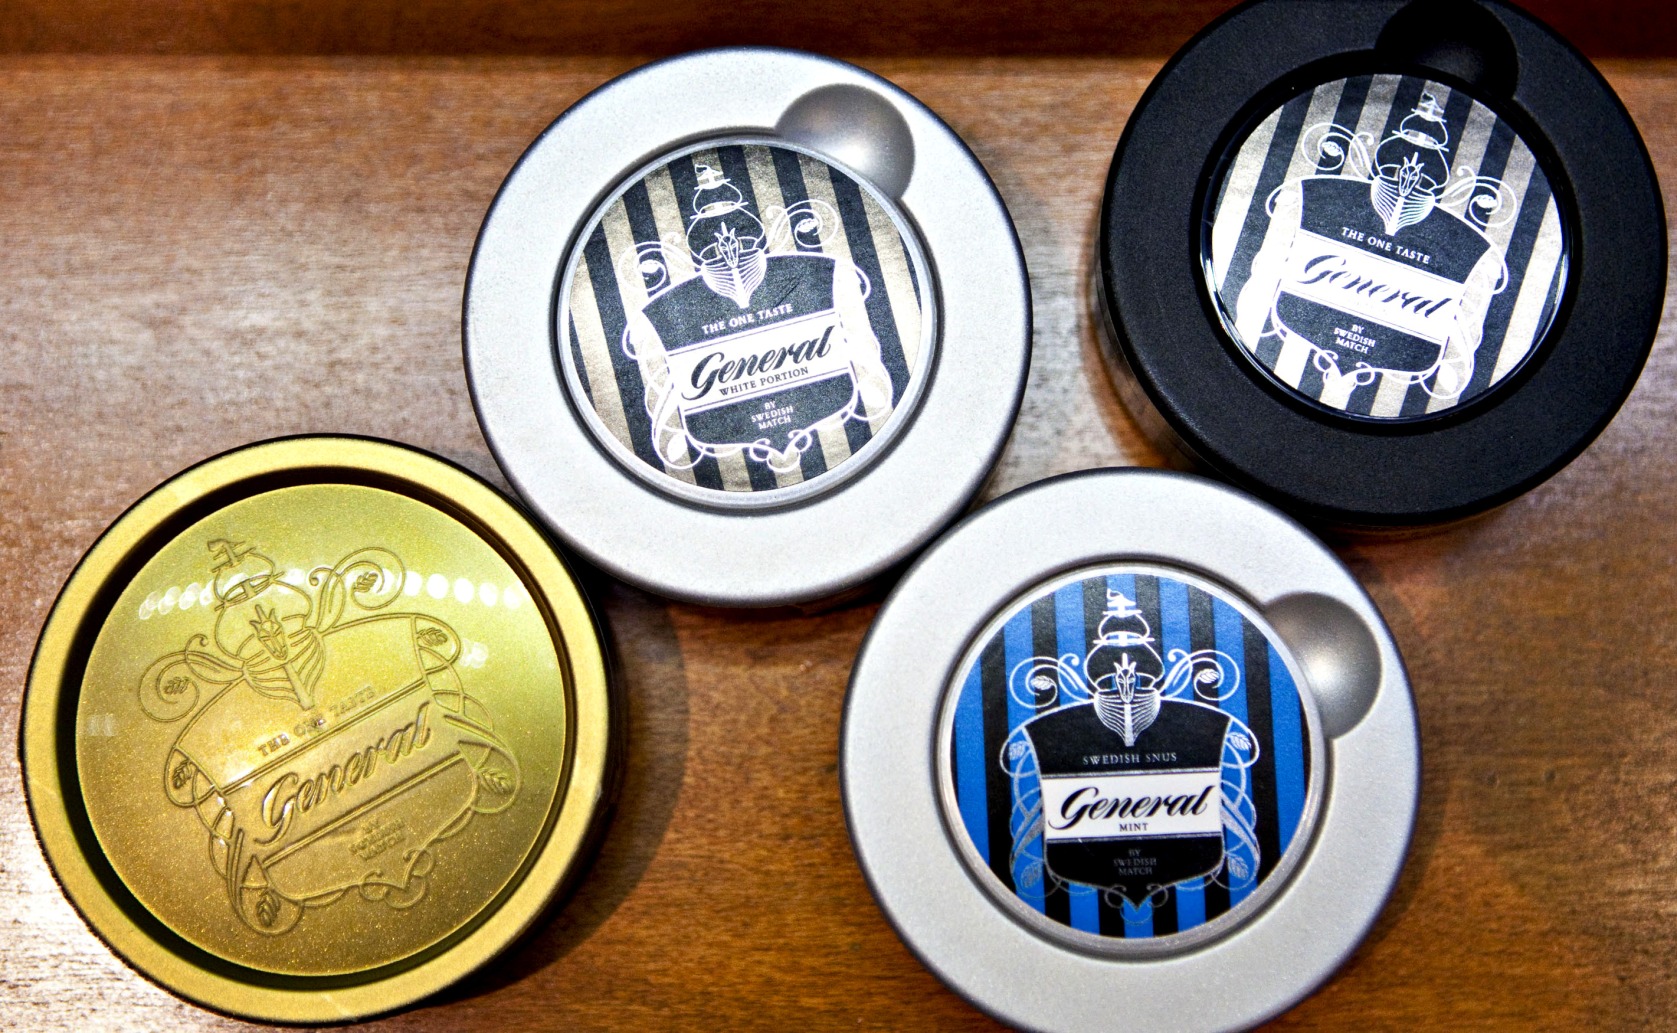 Buy General Snus Online - Free & Fast Shipping 